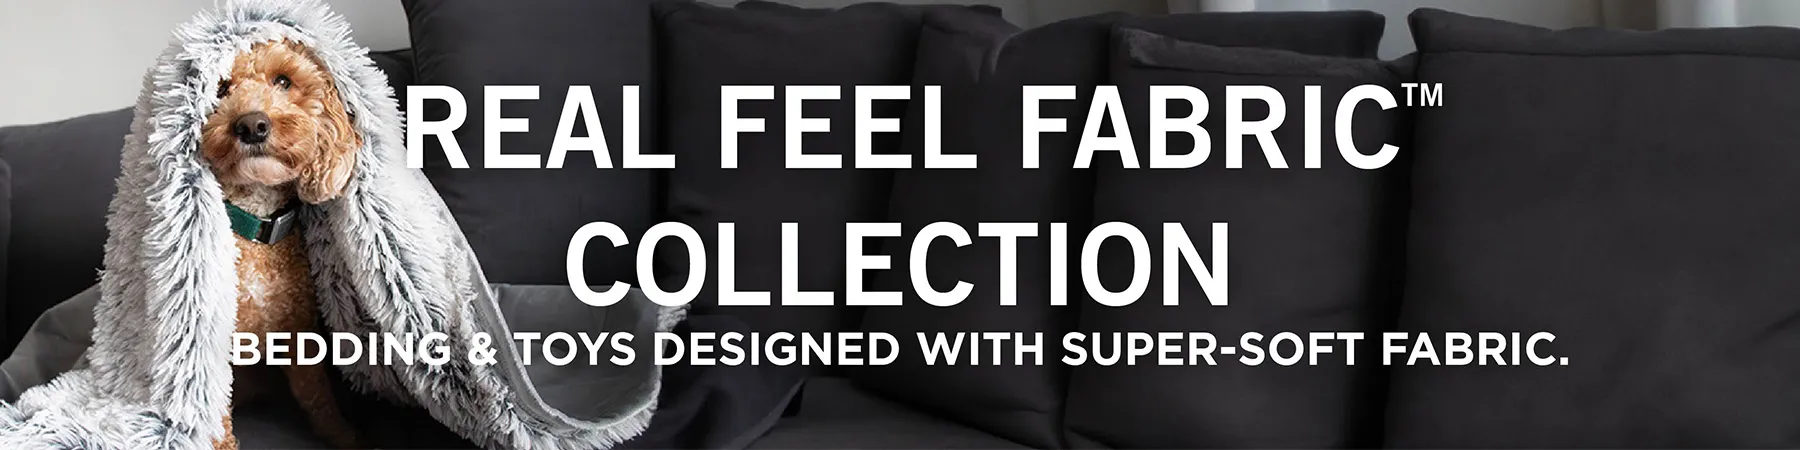 Real Feel Fabric Collection